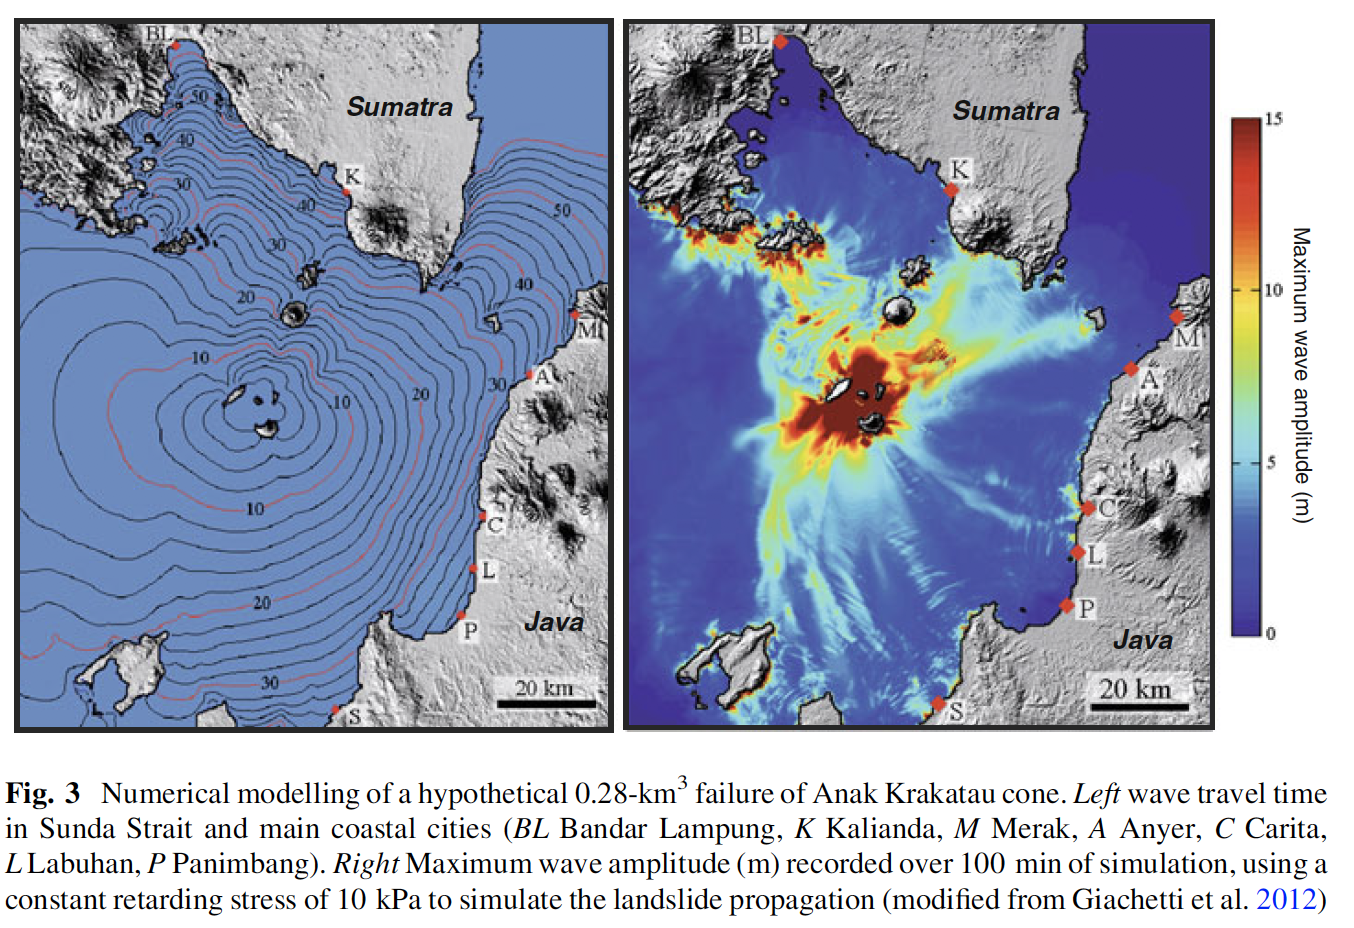 Source: Paris R, Switzer A, Belousova M, Belousova A, Ontowirjo B, Whelley P L, and Ulvrova M. Volcanic tsunami: a review of source mechanisms, past events and hazards in Southeast Asia (Indonesia, Philippines, Papua New Guinea). Natural Hazards (2014).